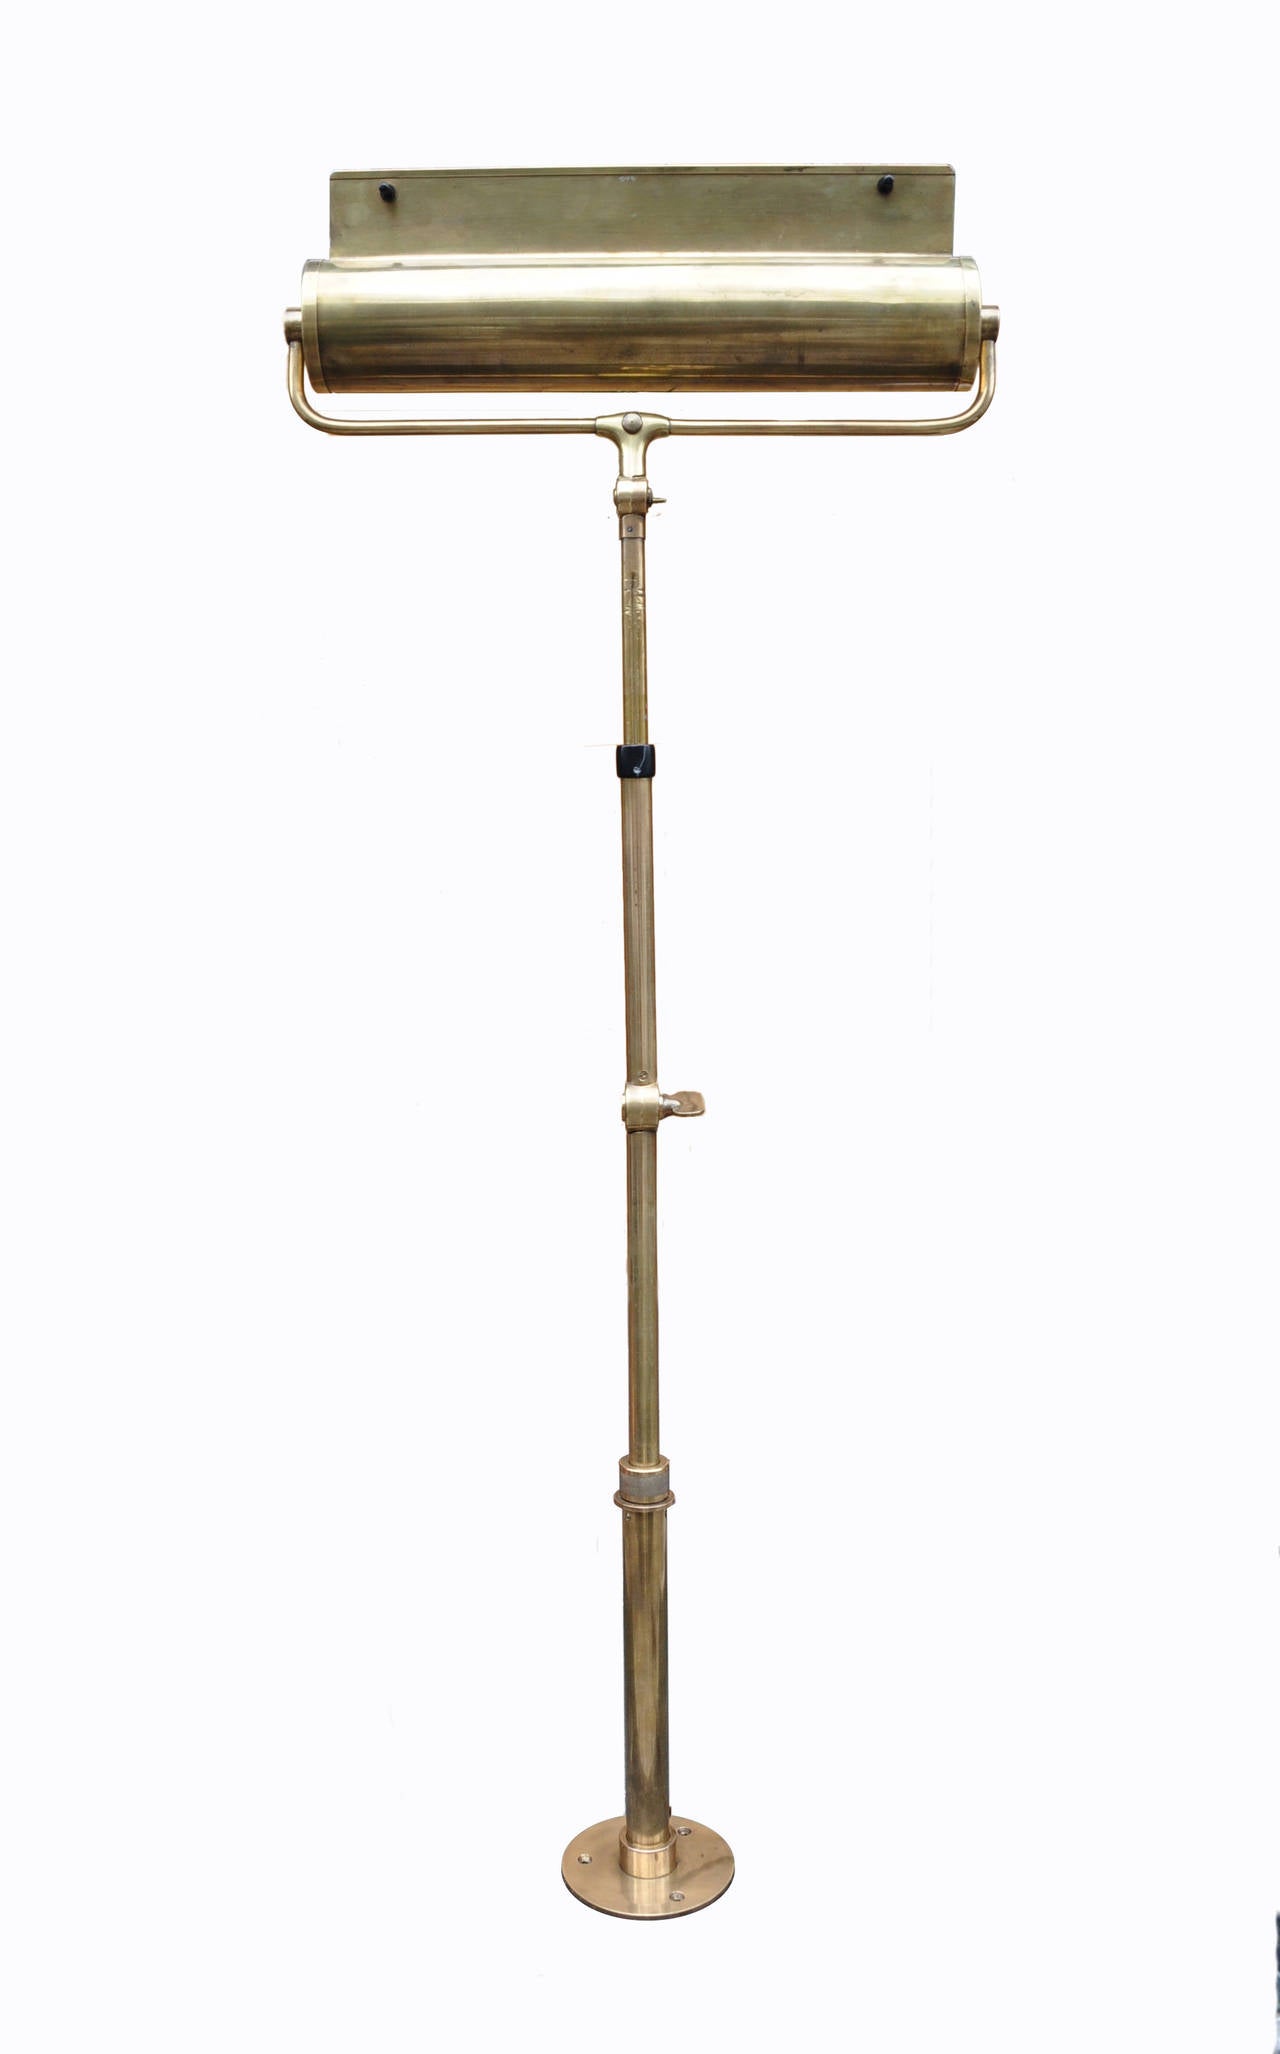 Architectural table or wall mount lamp with dual telescopic and articulated juncture. The telescopic range and heavy dual pivoting joints allows a wide range of light possibilities. In full vertical telescopic the system extends from 31-42”
The